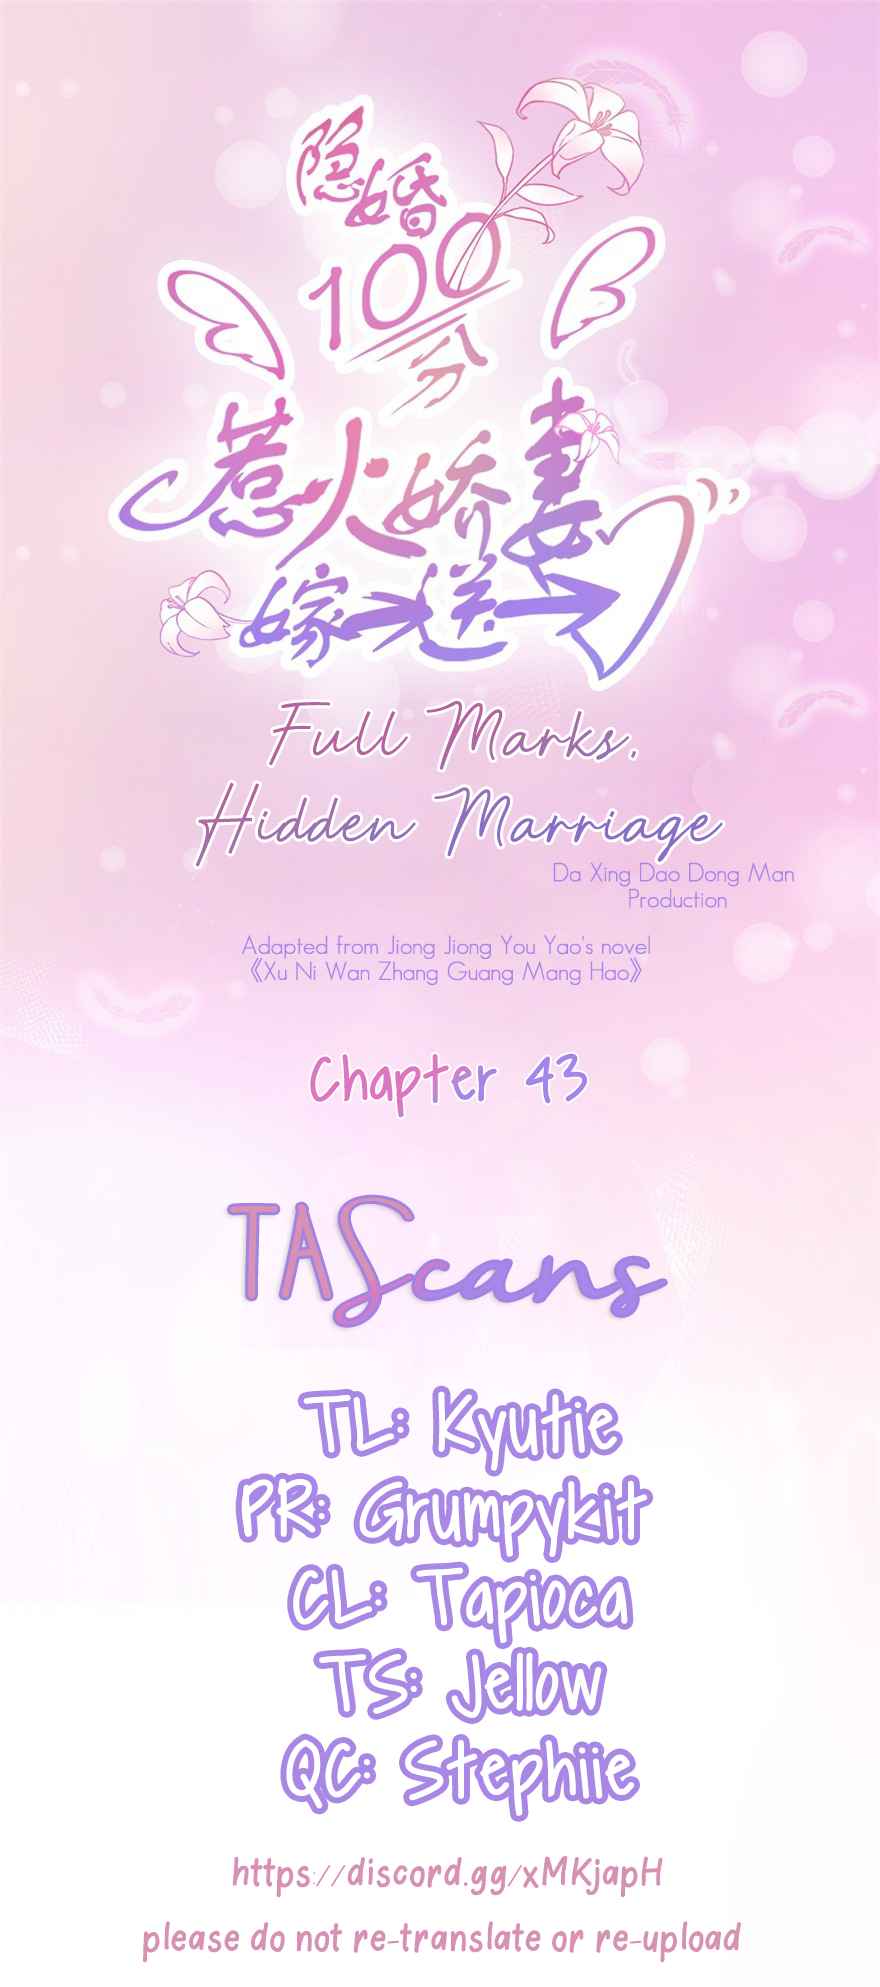 Full Marks, Hidden Marriage Ch. 43 Ning Xi, is your dog eyes blind?